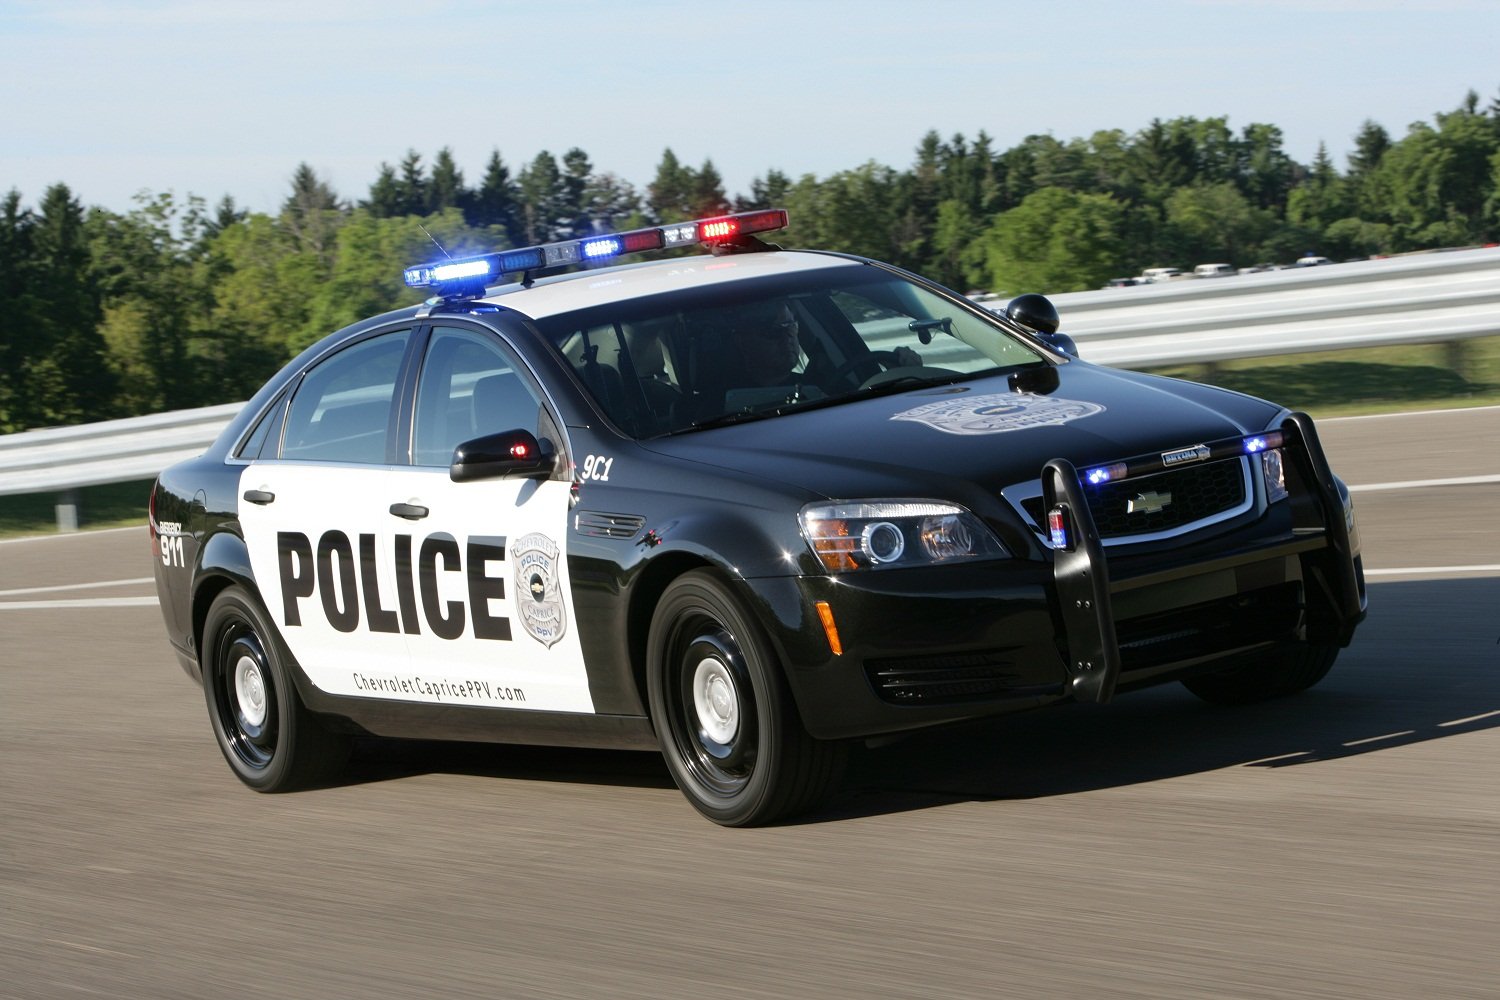 Caprice PPV: Time to Dust Off the Radar Detector...